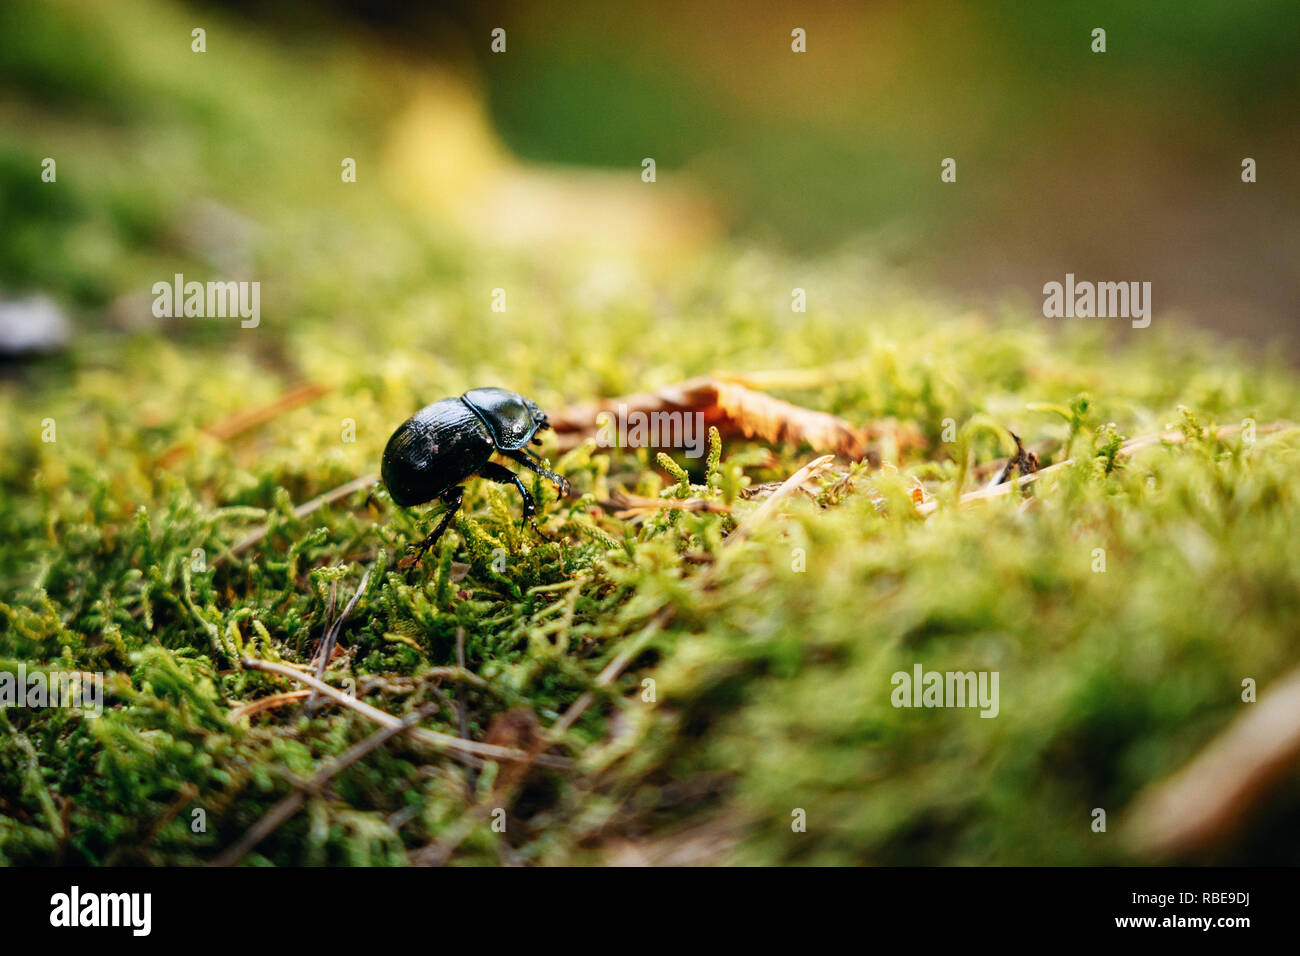 A big black dor beetle sitting on green moss and leaves Stock Photo